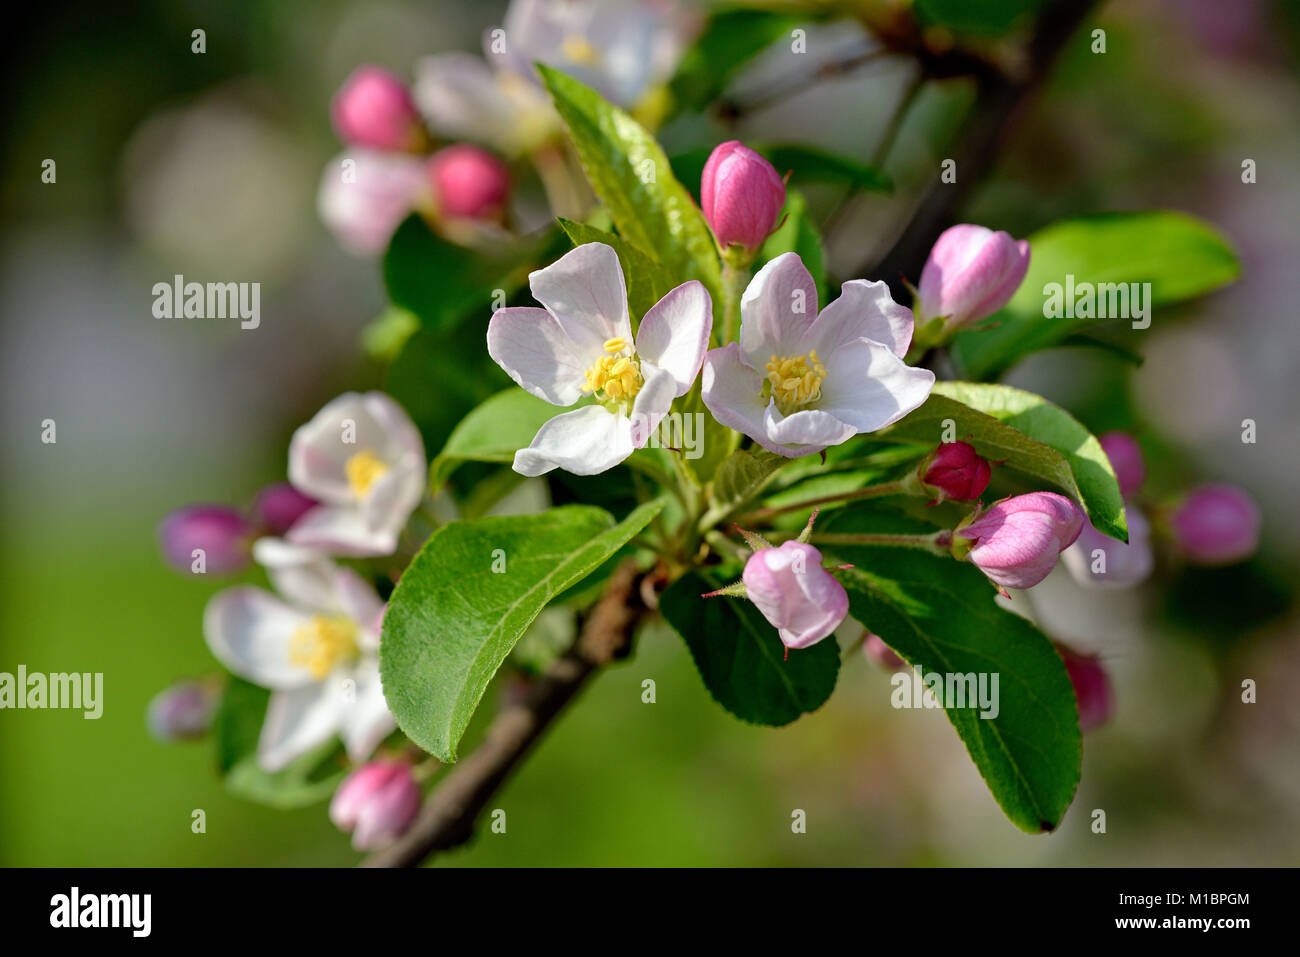 Apple tree (Malus), twig with flowers, Germany Stock Photo